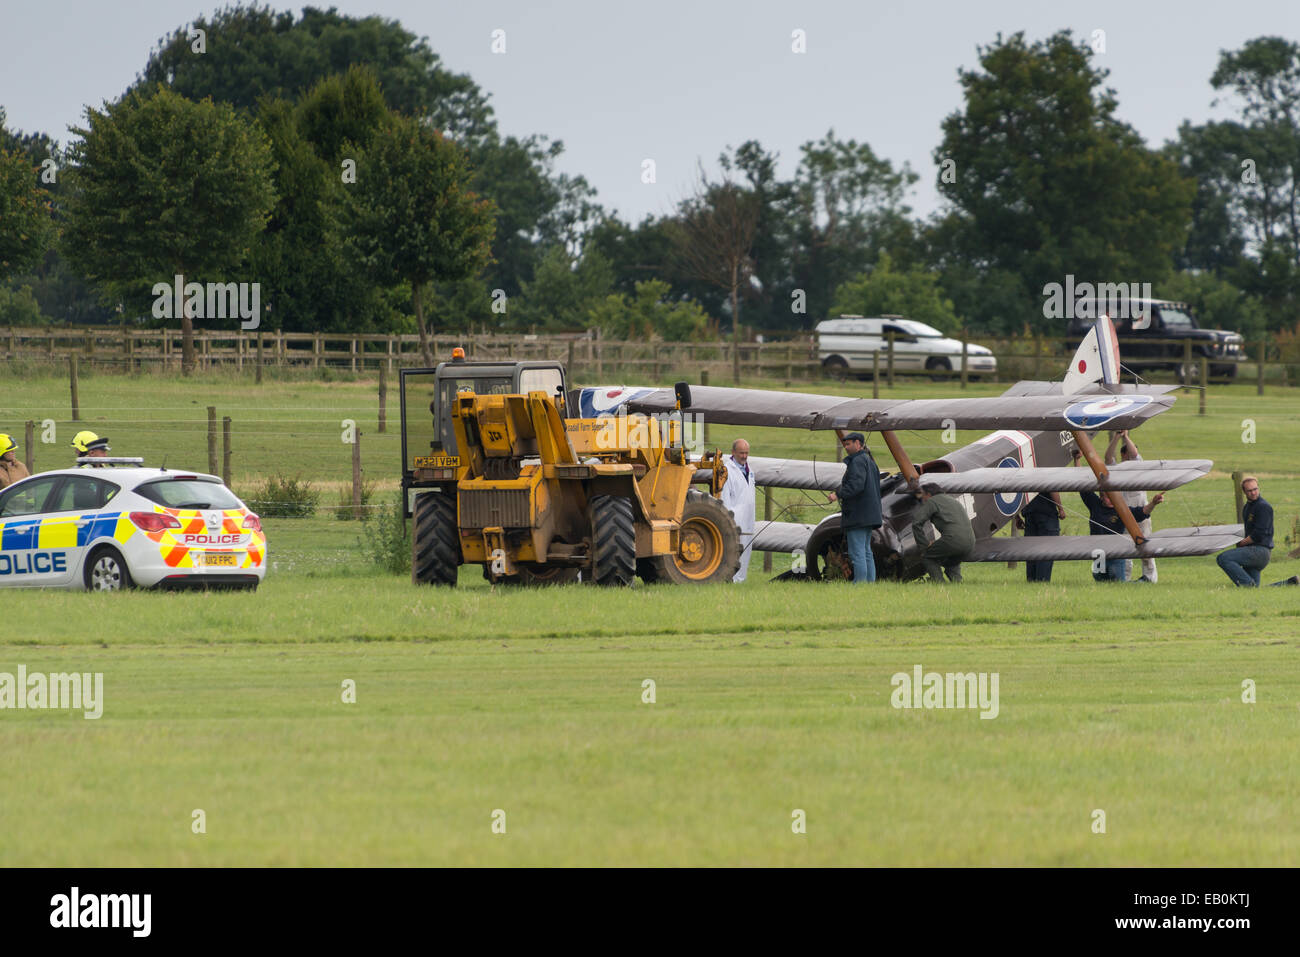 Biggleswade, UK - 29 June 2014: A vintage 1916 British Sopwith Triplane crash landed at the Shuttleworth Collection air show. Stock Photo